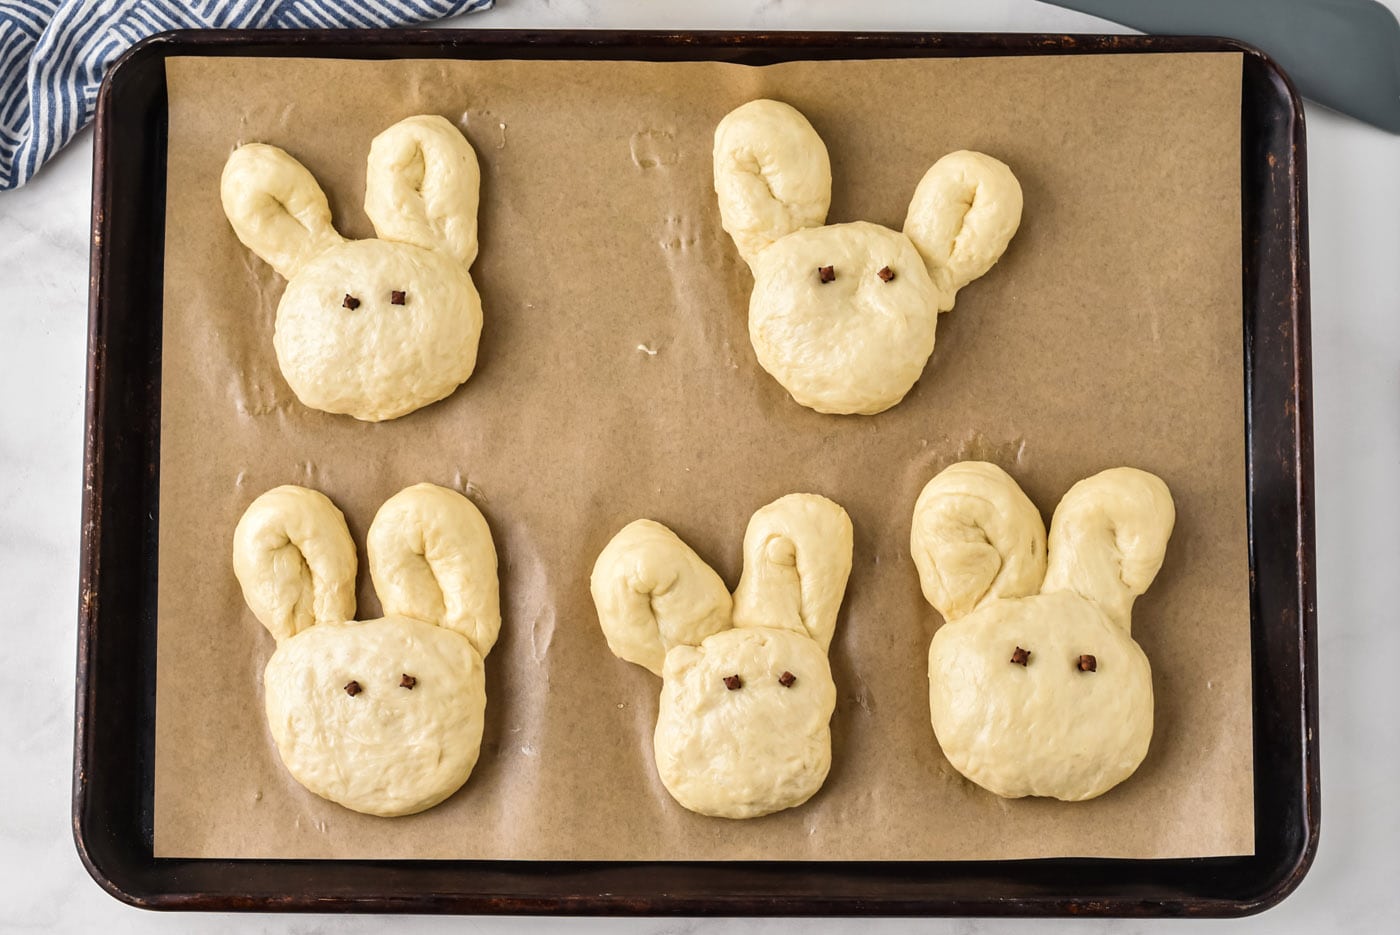 bunny rolls with cloves as eyes